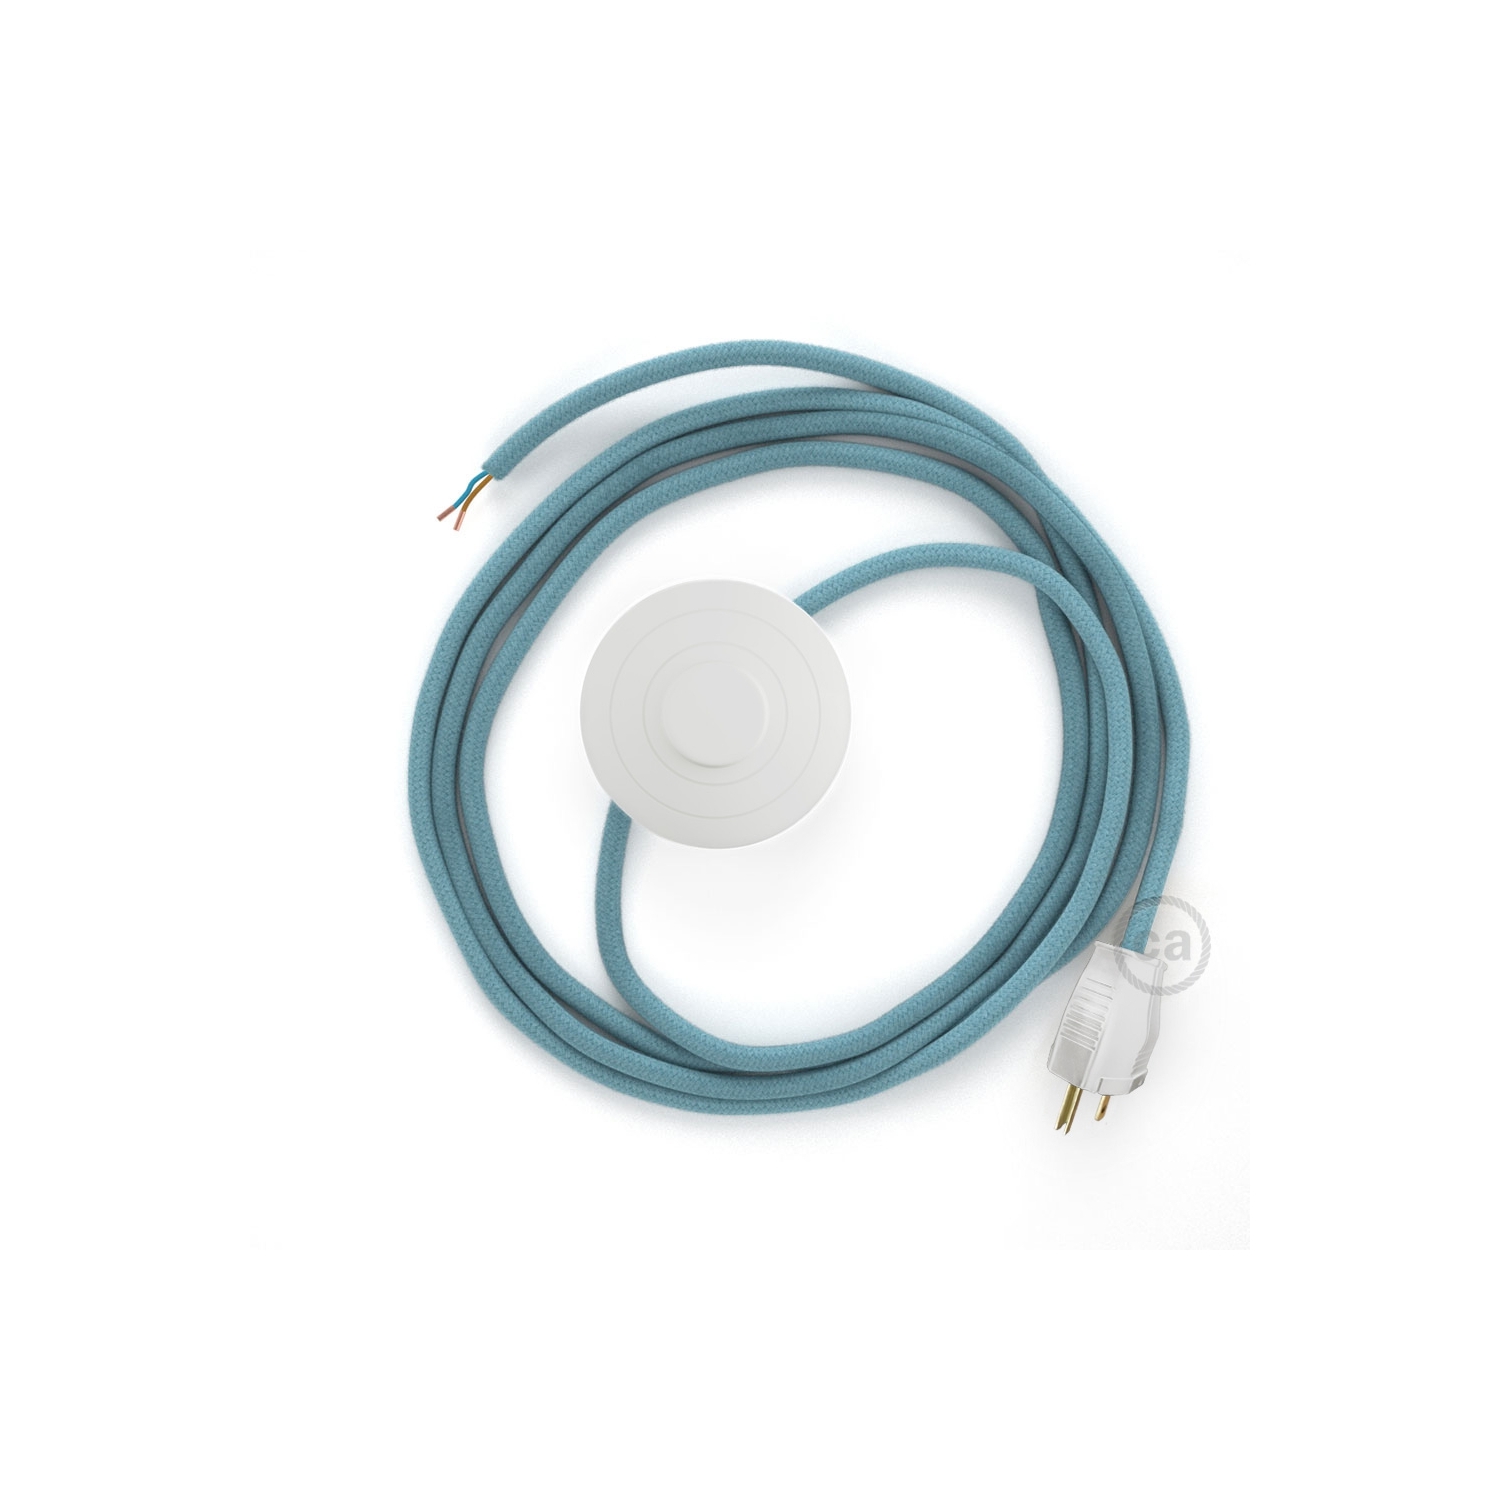 Power Cord with foot switch, RC53 Baby Blue Cotton - Choose color of switch/plug